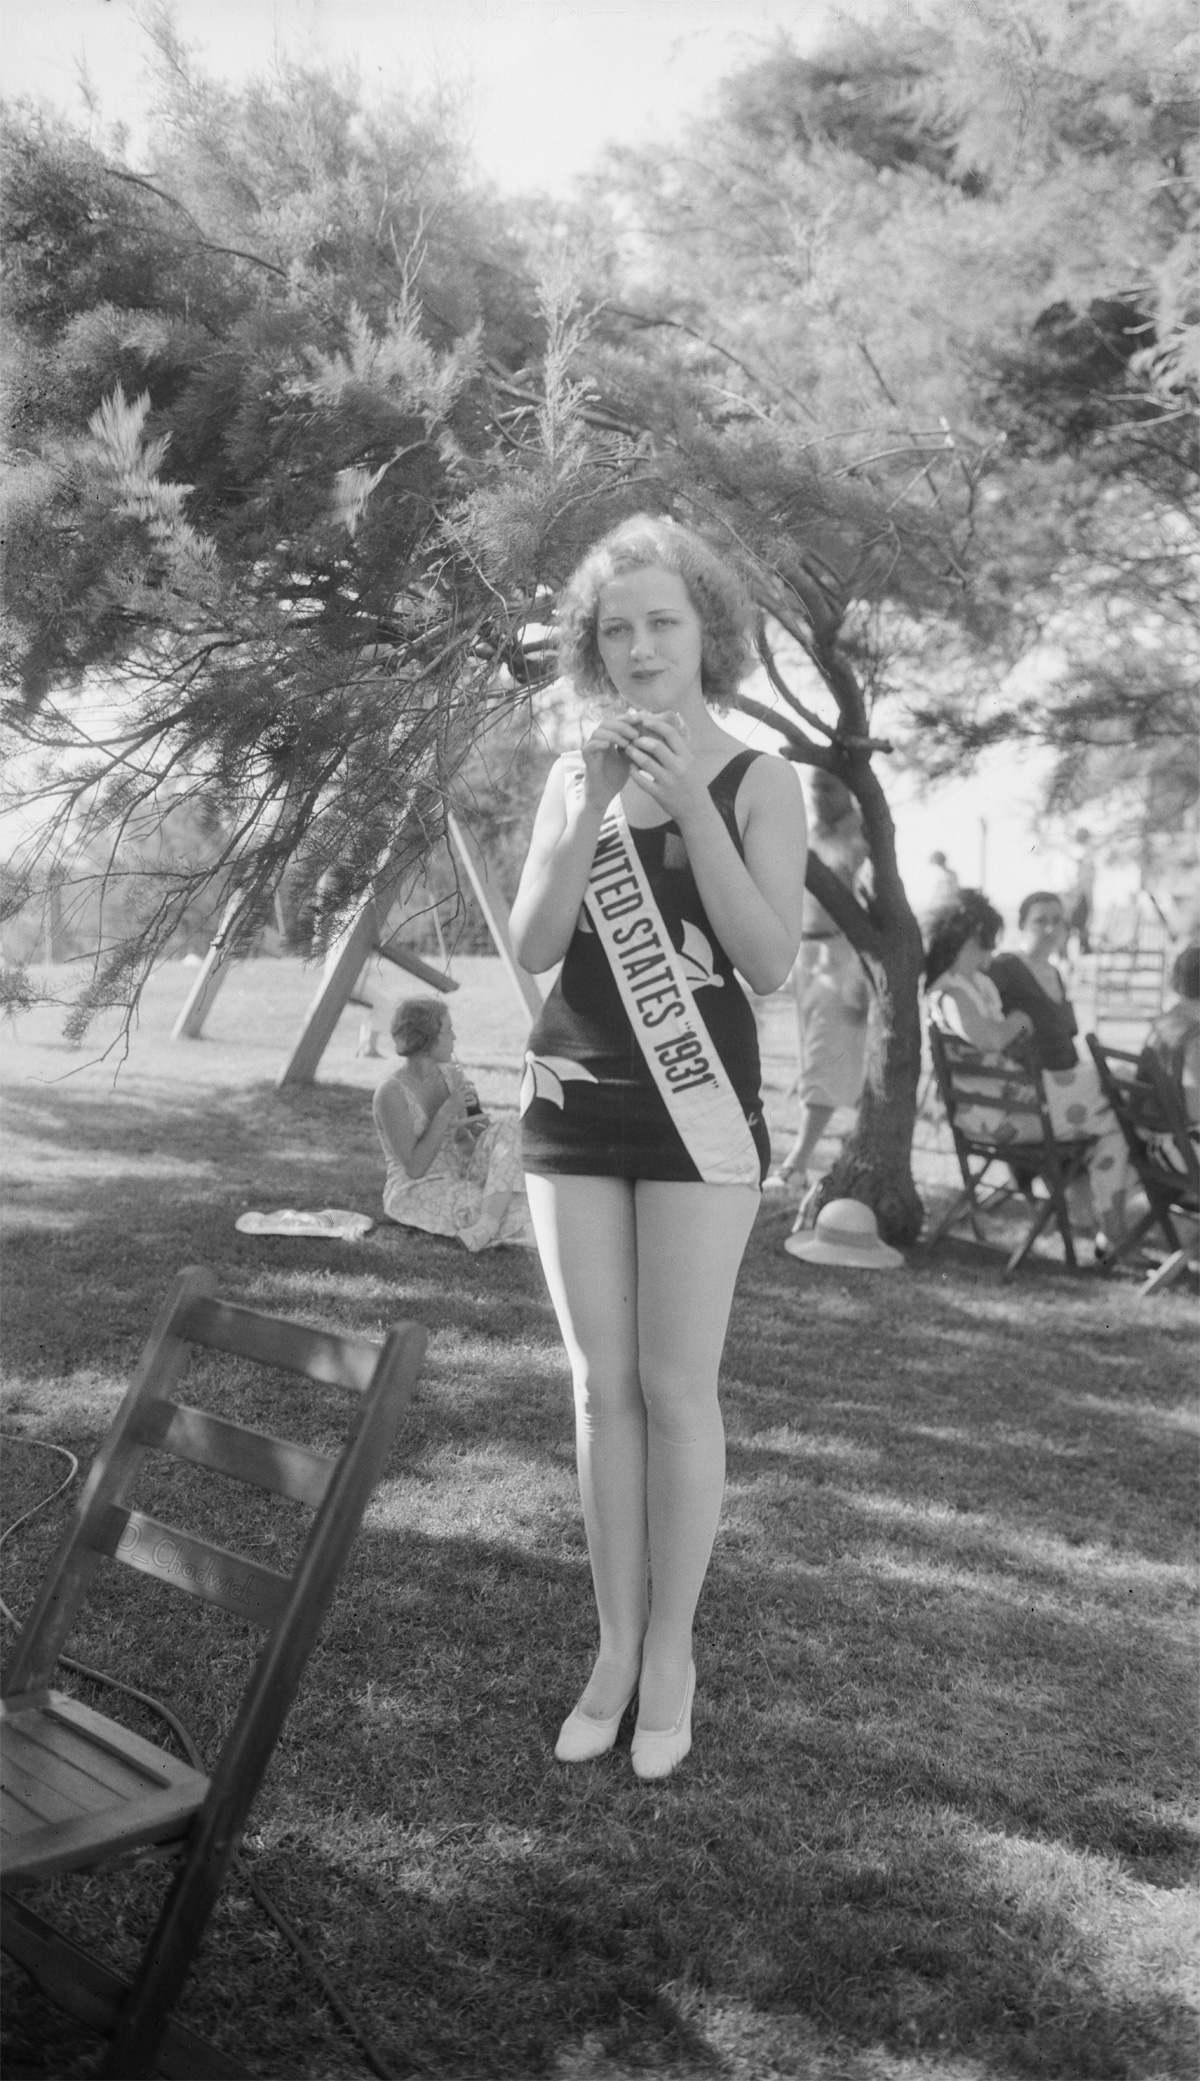 Anne Lee Patterson (Miss Northern Kentucky).  She won her title in Galveston, Texas. Actress Dorothy Lamour was her first runner-up.  She then went on to take second place in the 1931 Miss Universe pageant and joined the cast of the Ziegfeld Follies 1932 revival of “Showboat”.  Scanned from the original Eastman Kodak nitrate negative. View full size.